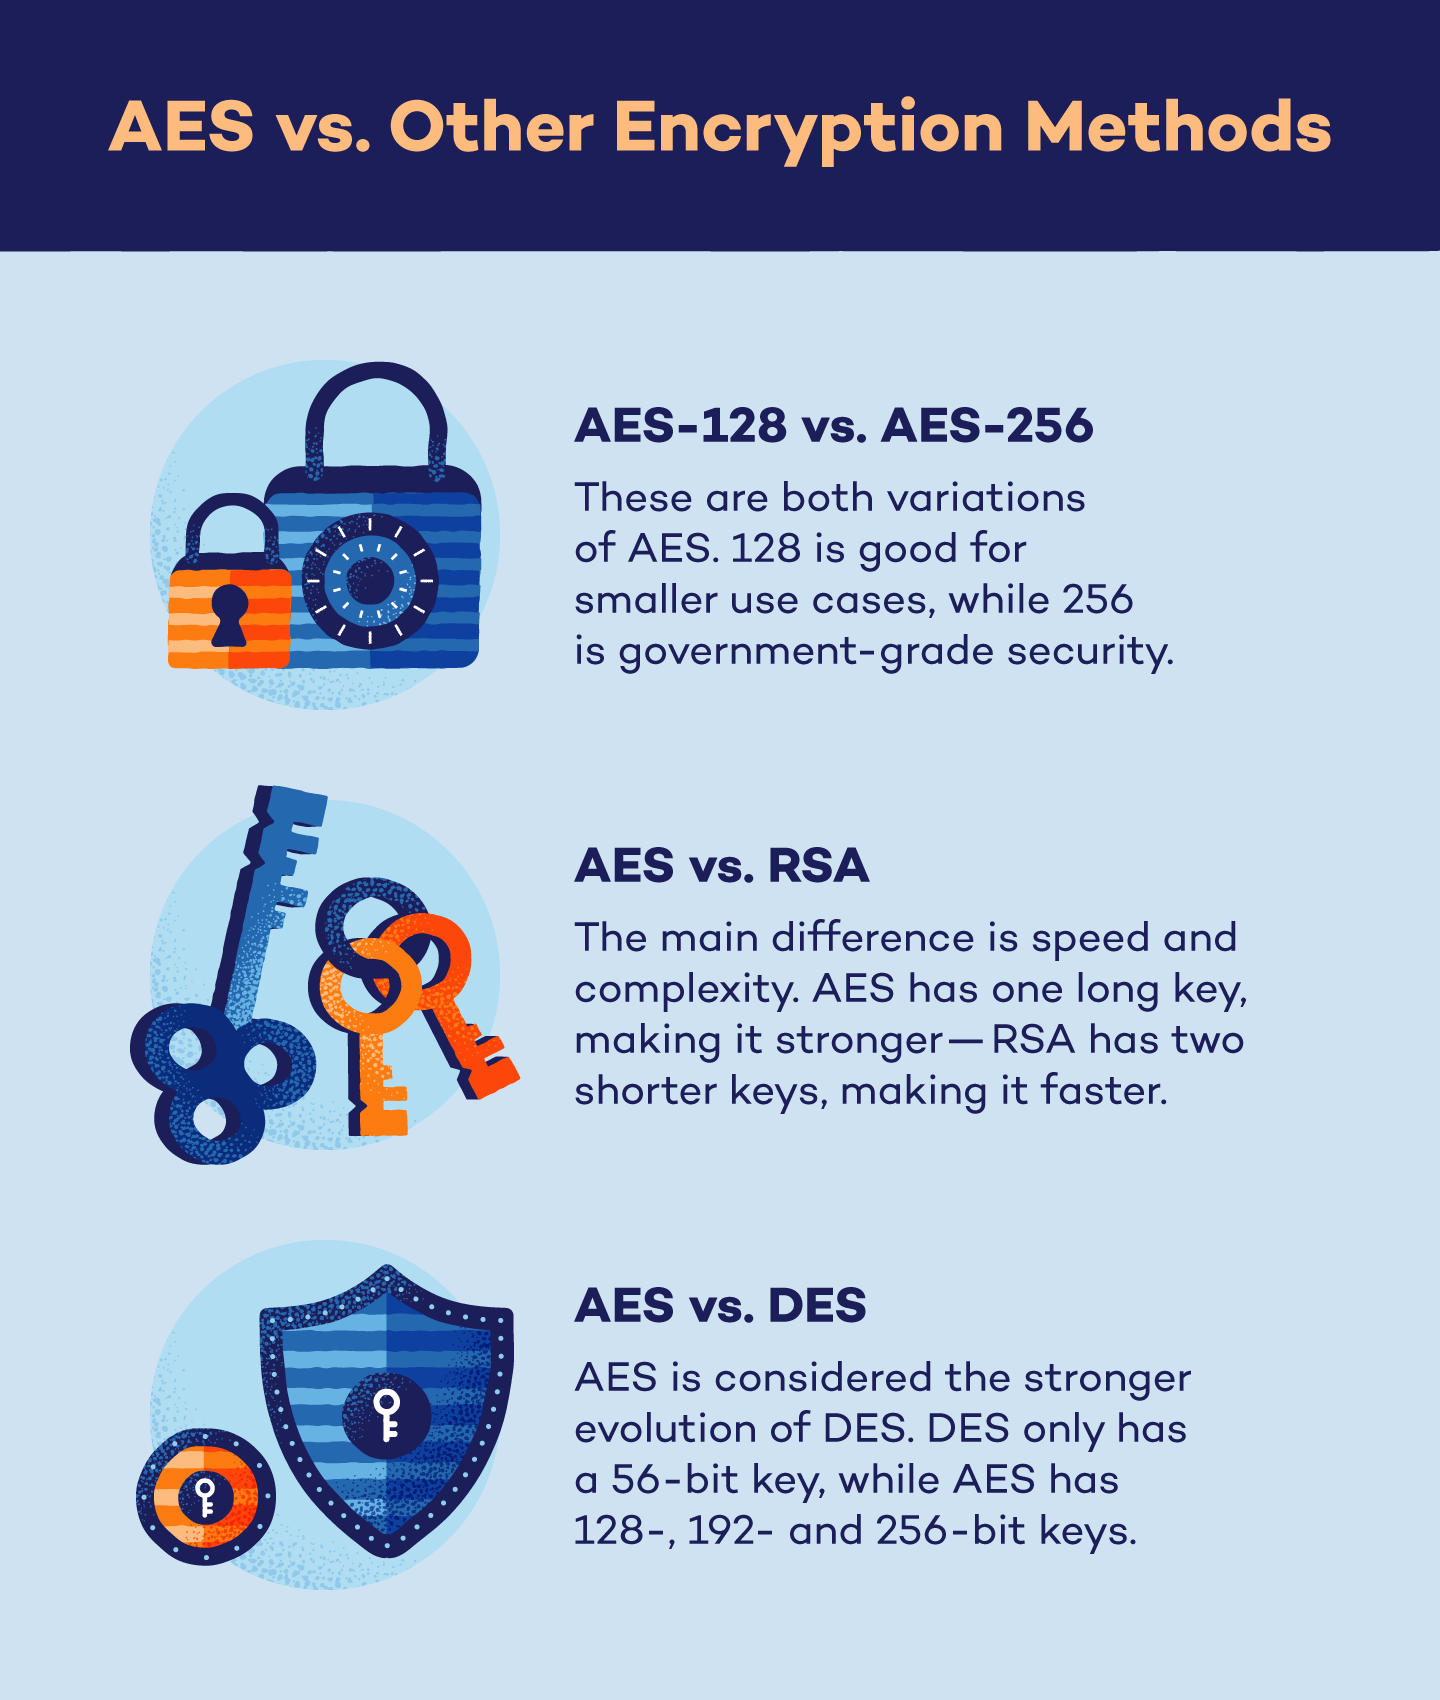 AES vs other encryption methods